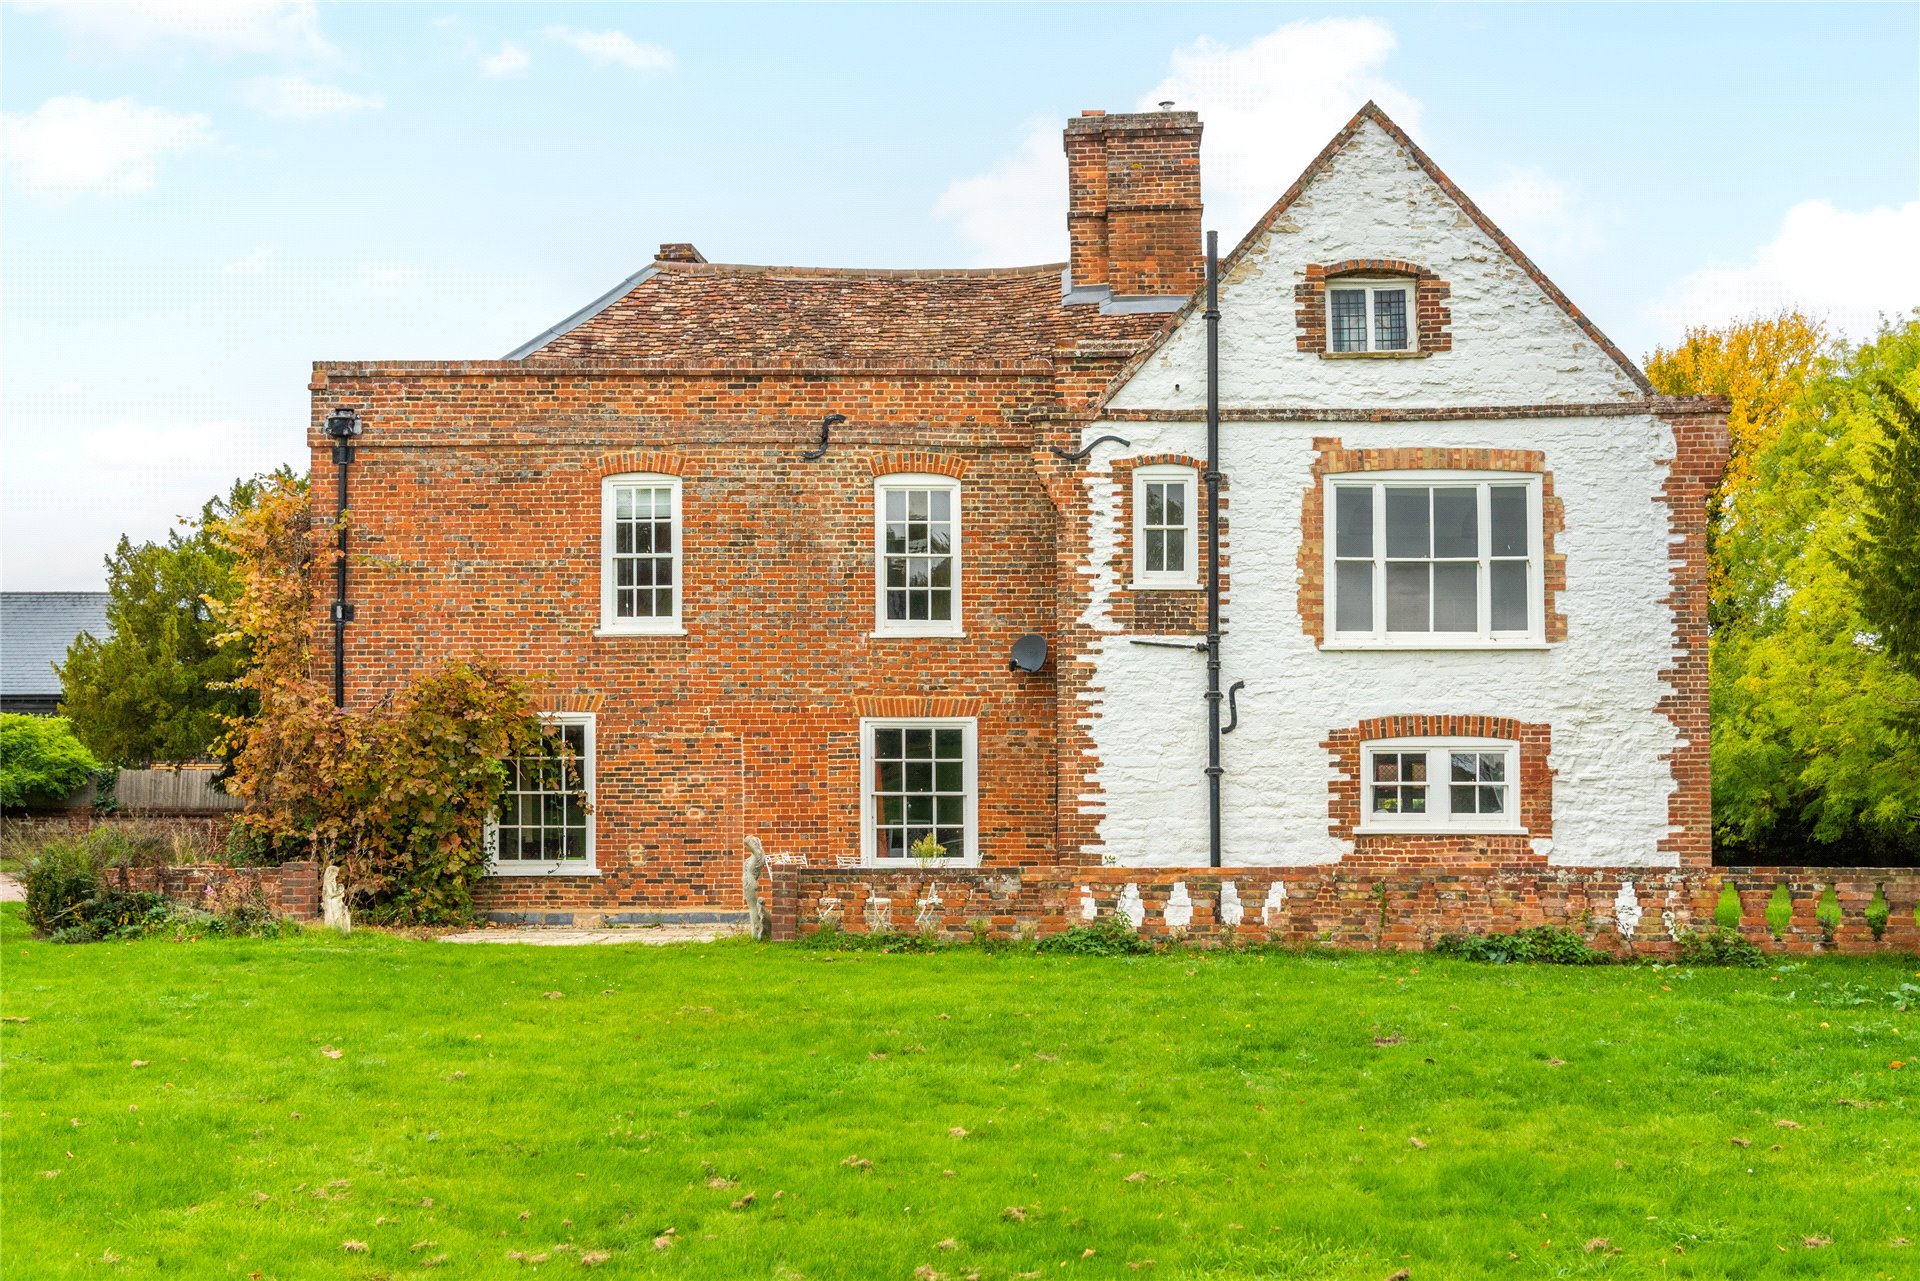 Francis York Old Ramerick Manor - Medieval Manor House in the Countryside Near London 28.jpg